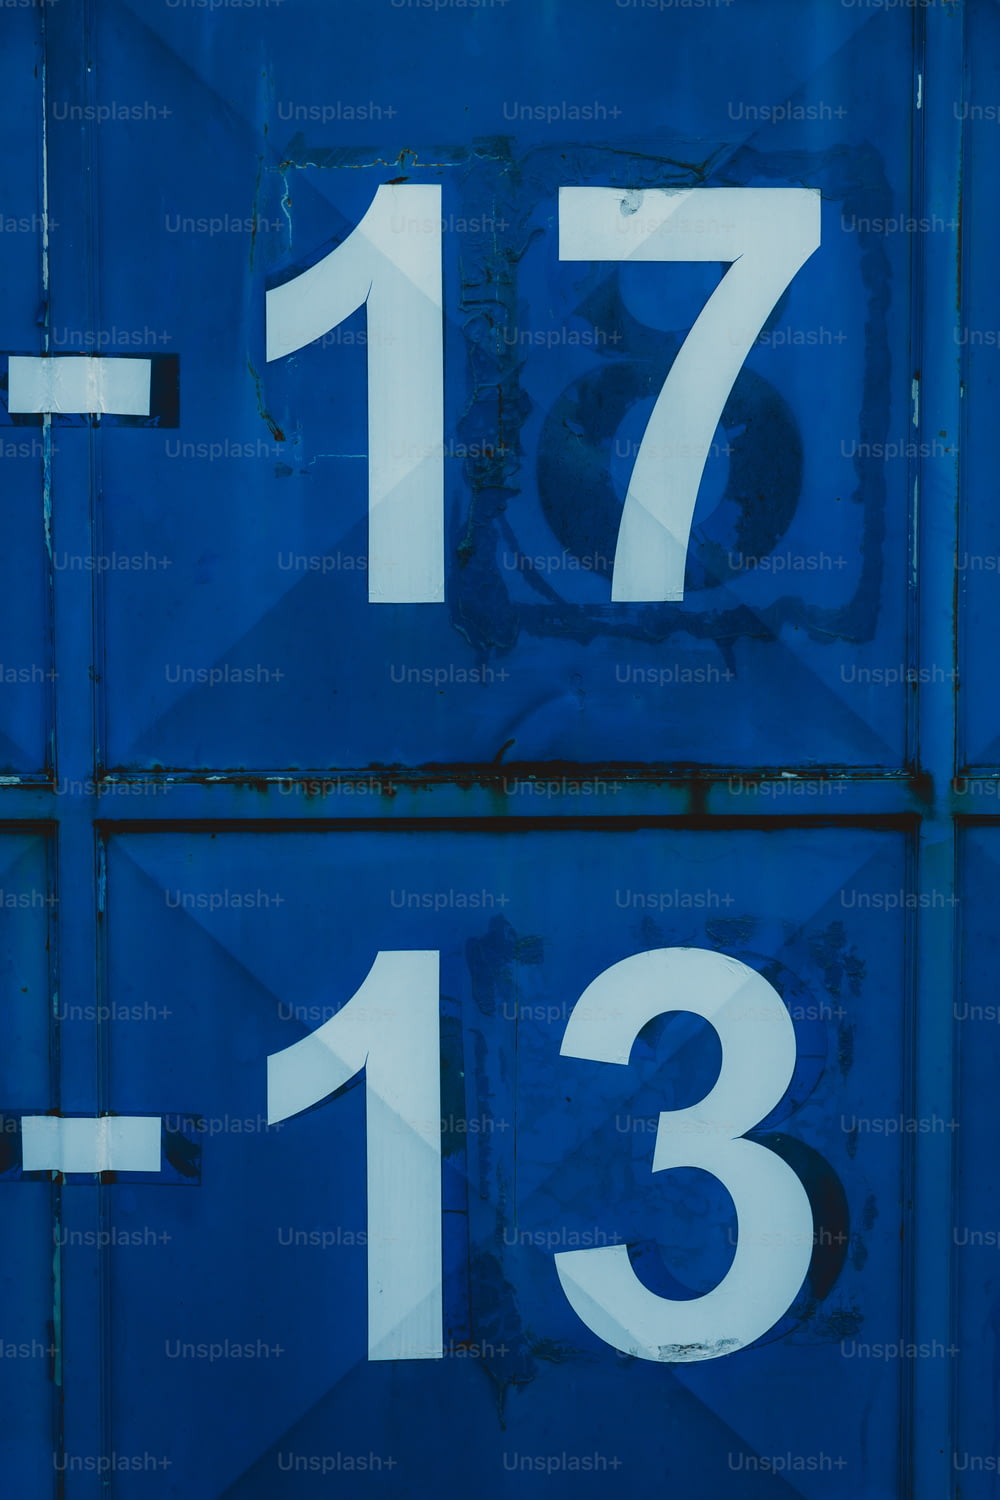 a close up of the numbers on a train car